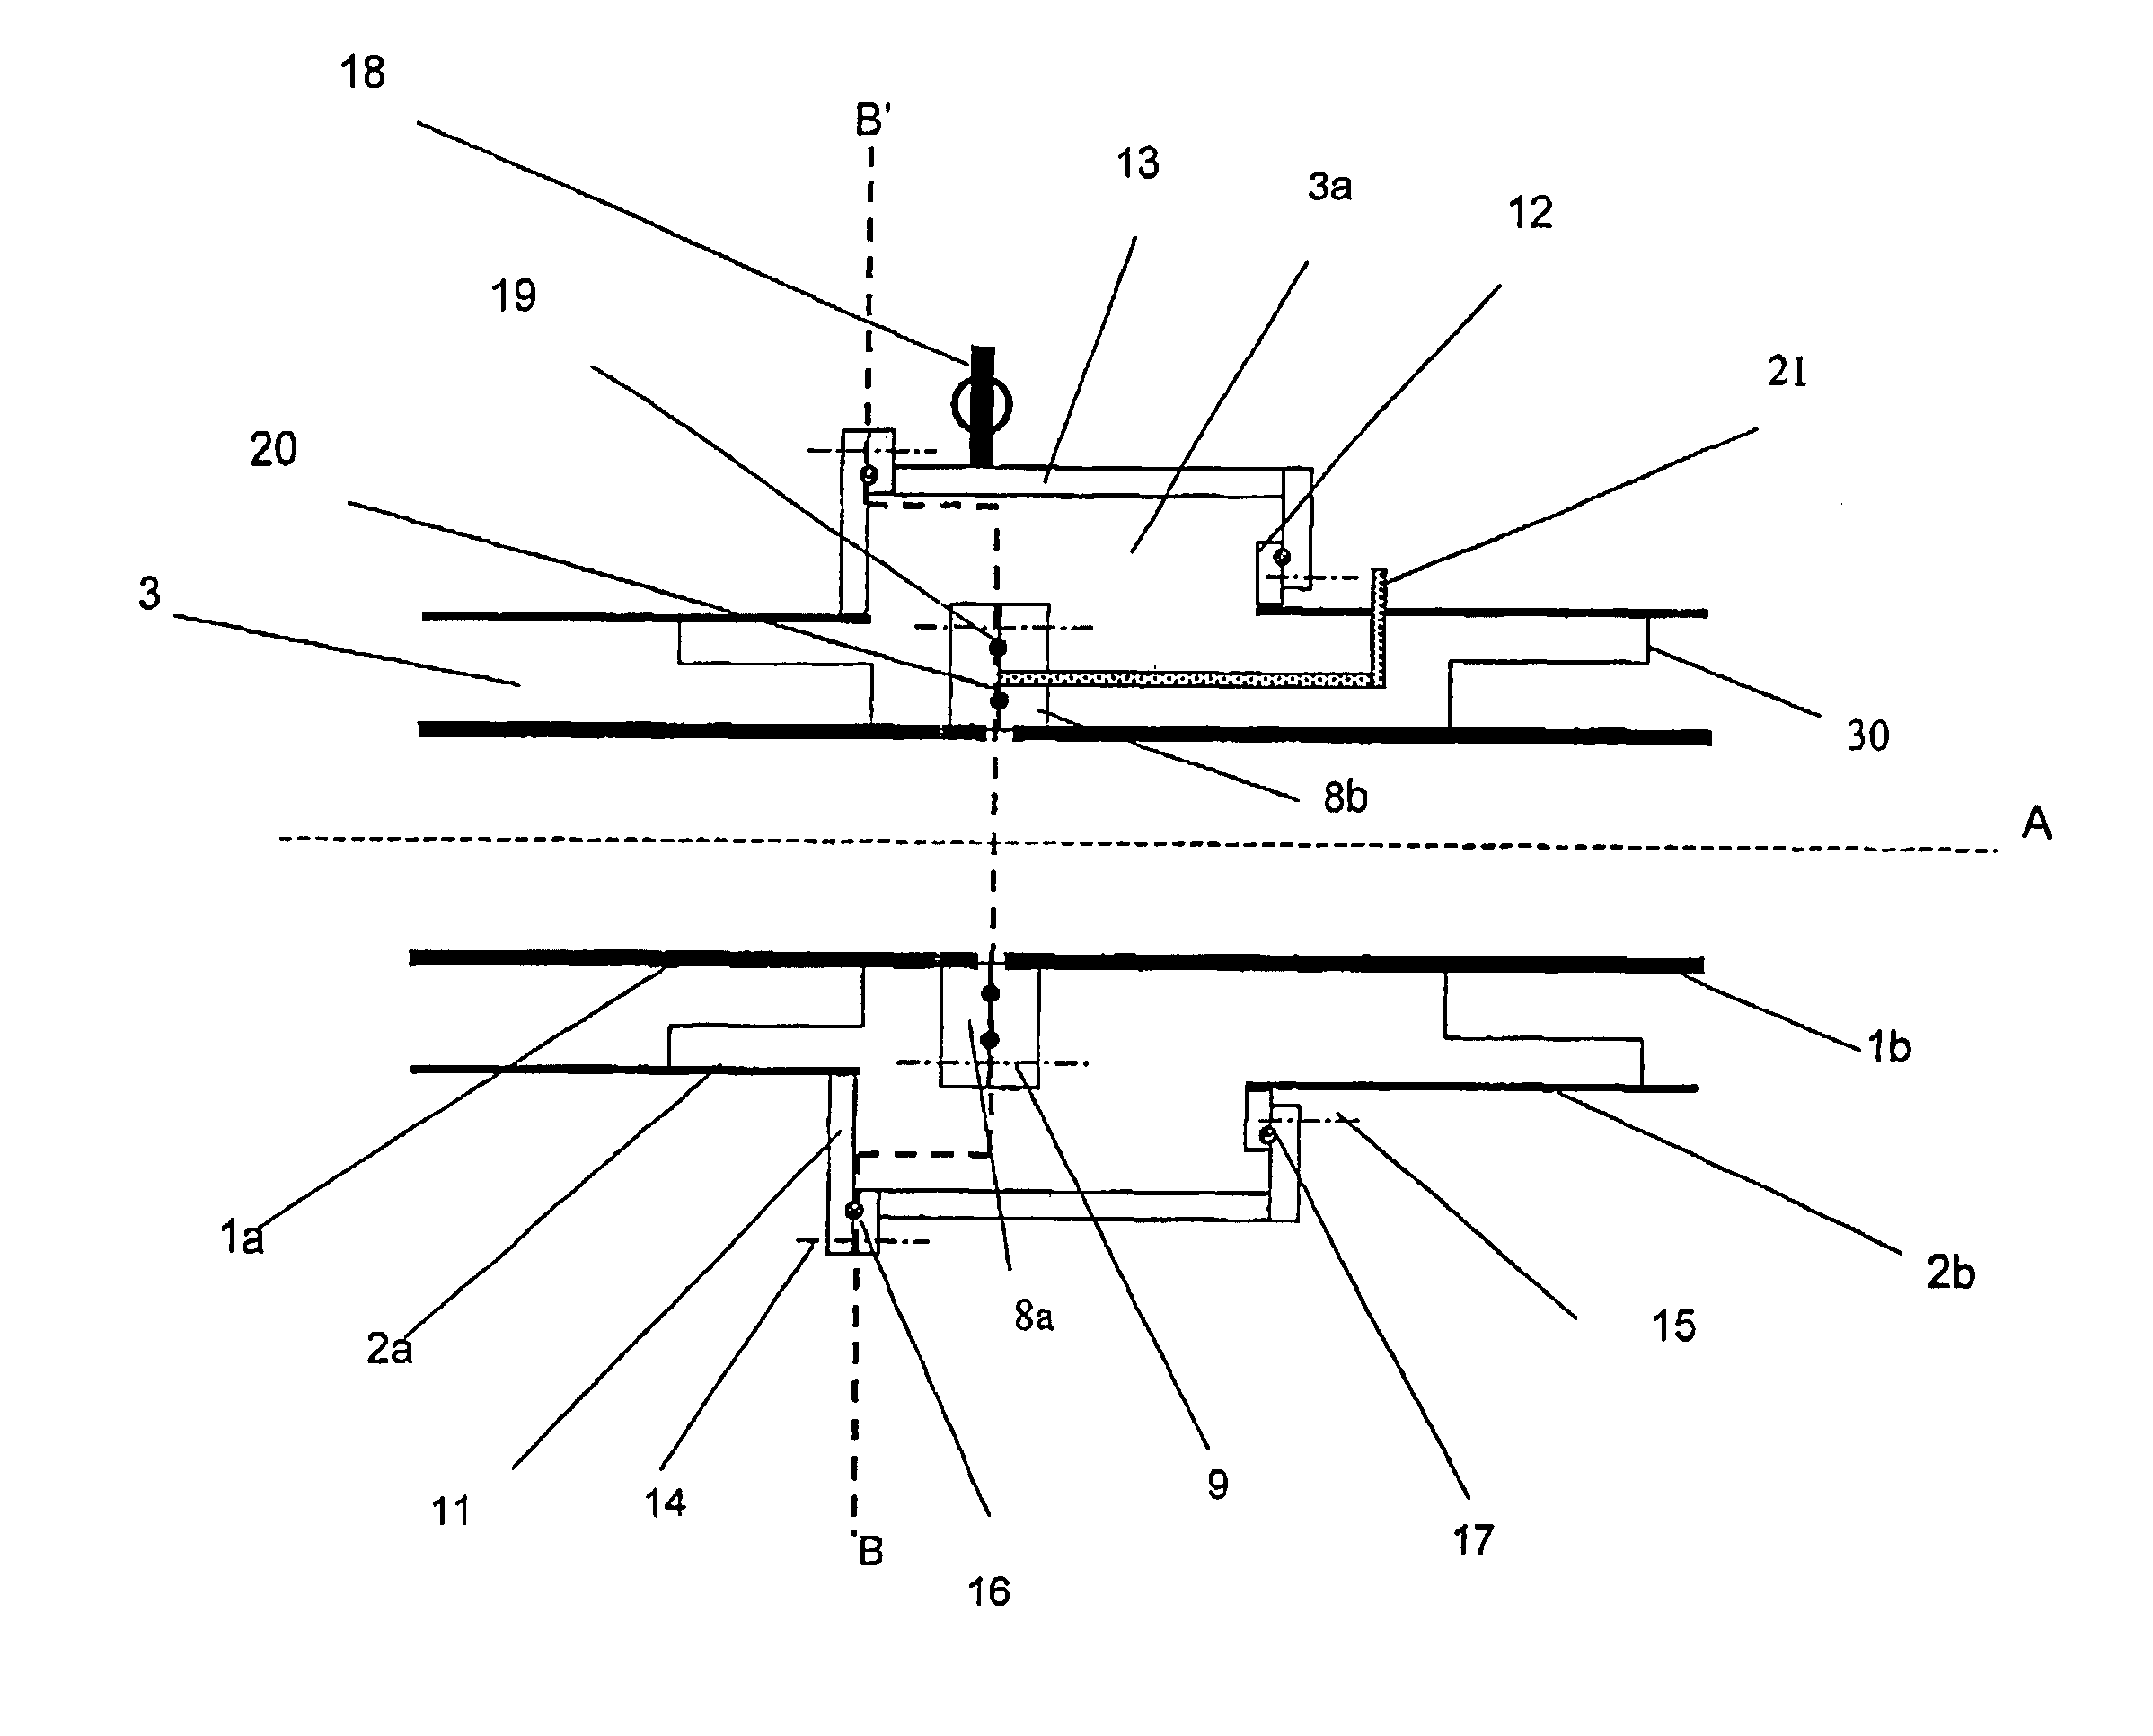 Electric power transport system comprising a cold dielectric superconducting cable